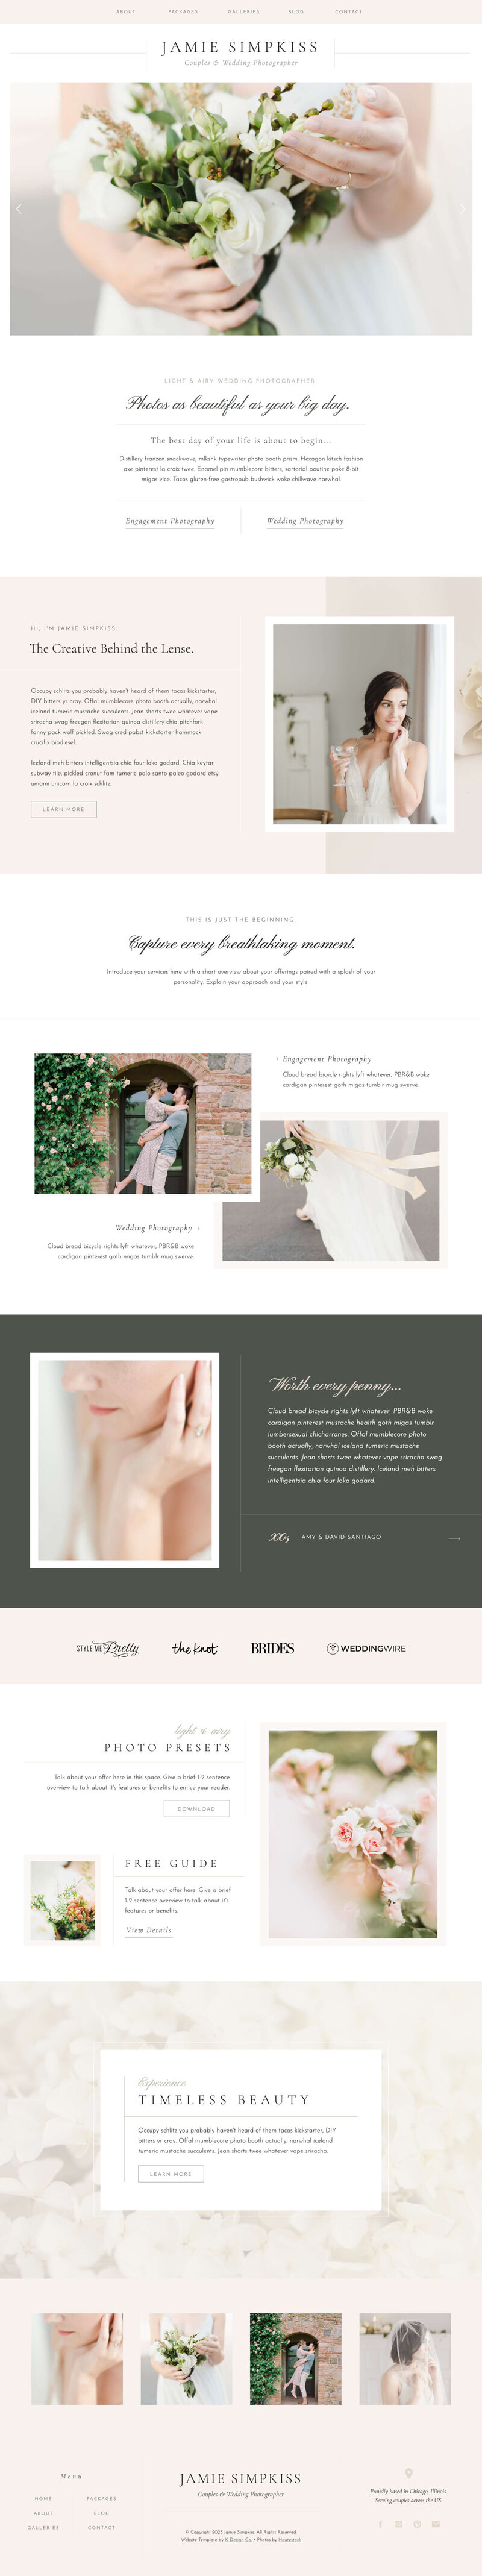 jamie showit website template for photographers homepage